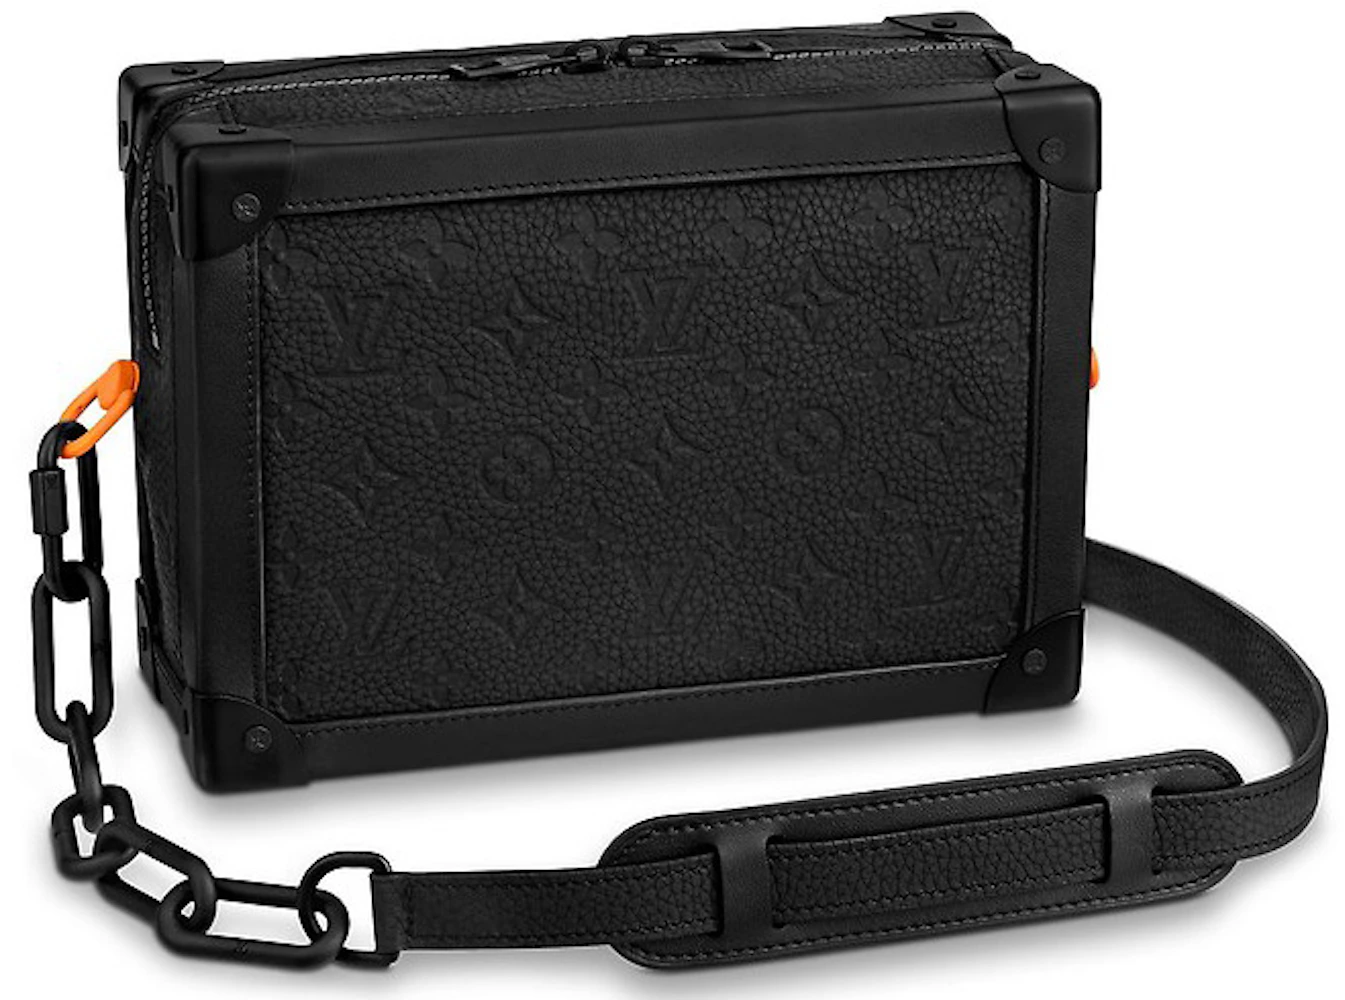 Louis Vuitton Soft Trunk Monogram Black in Taurillon Leather with